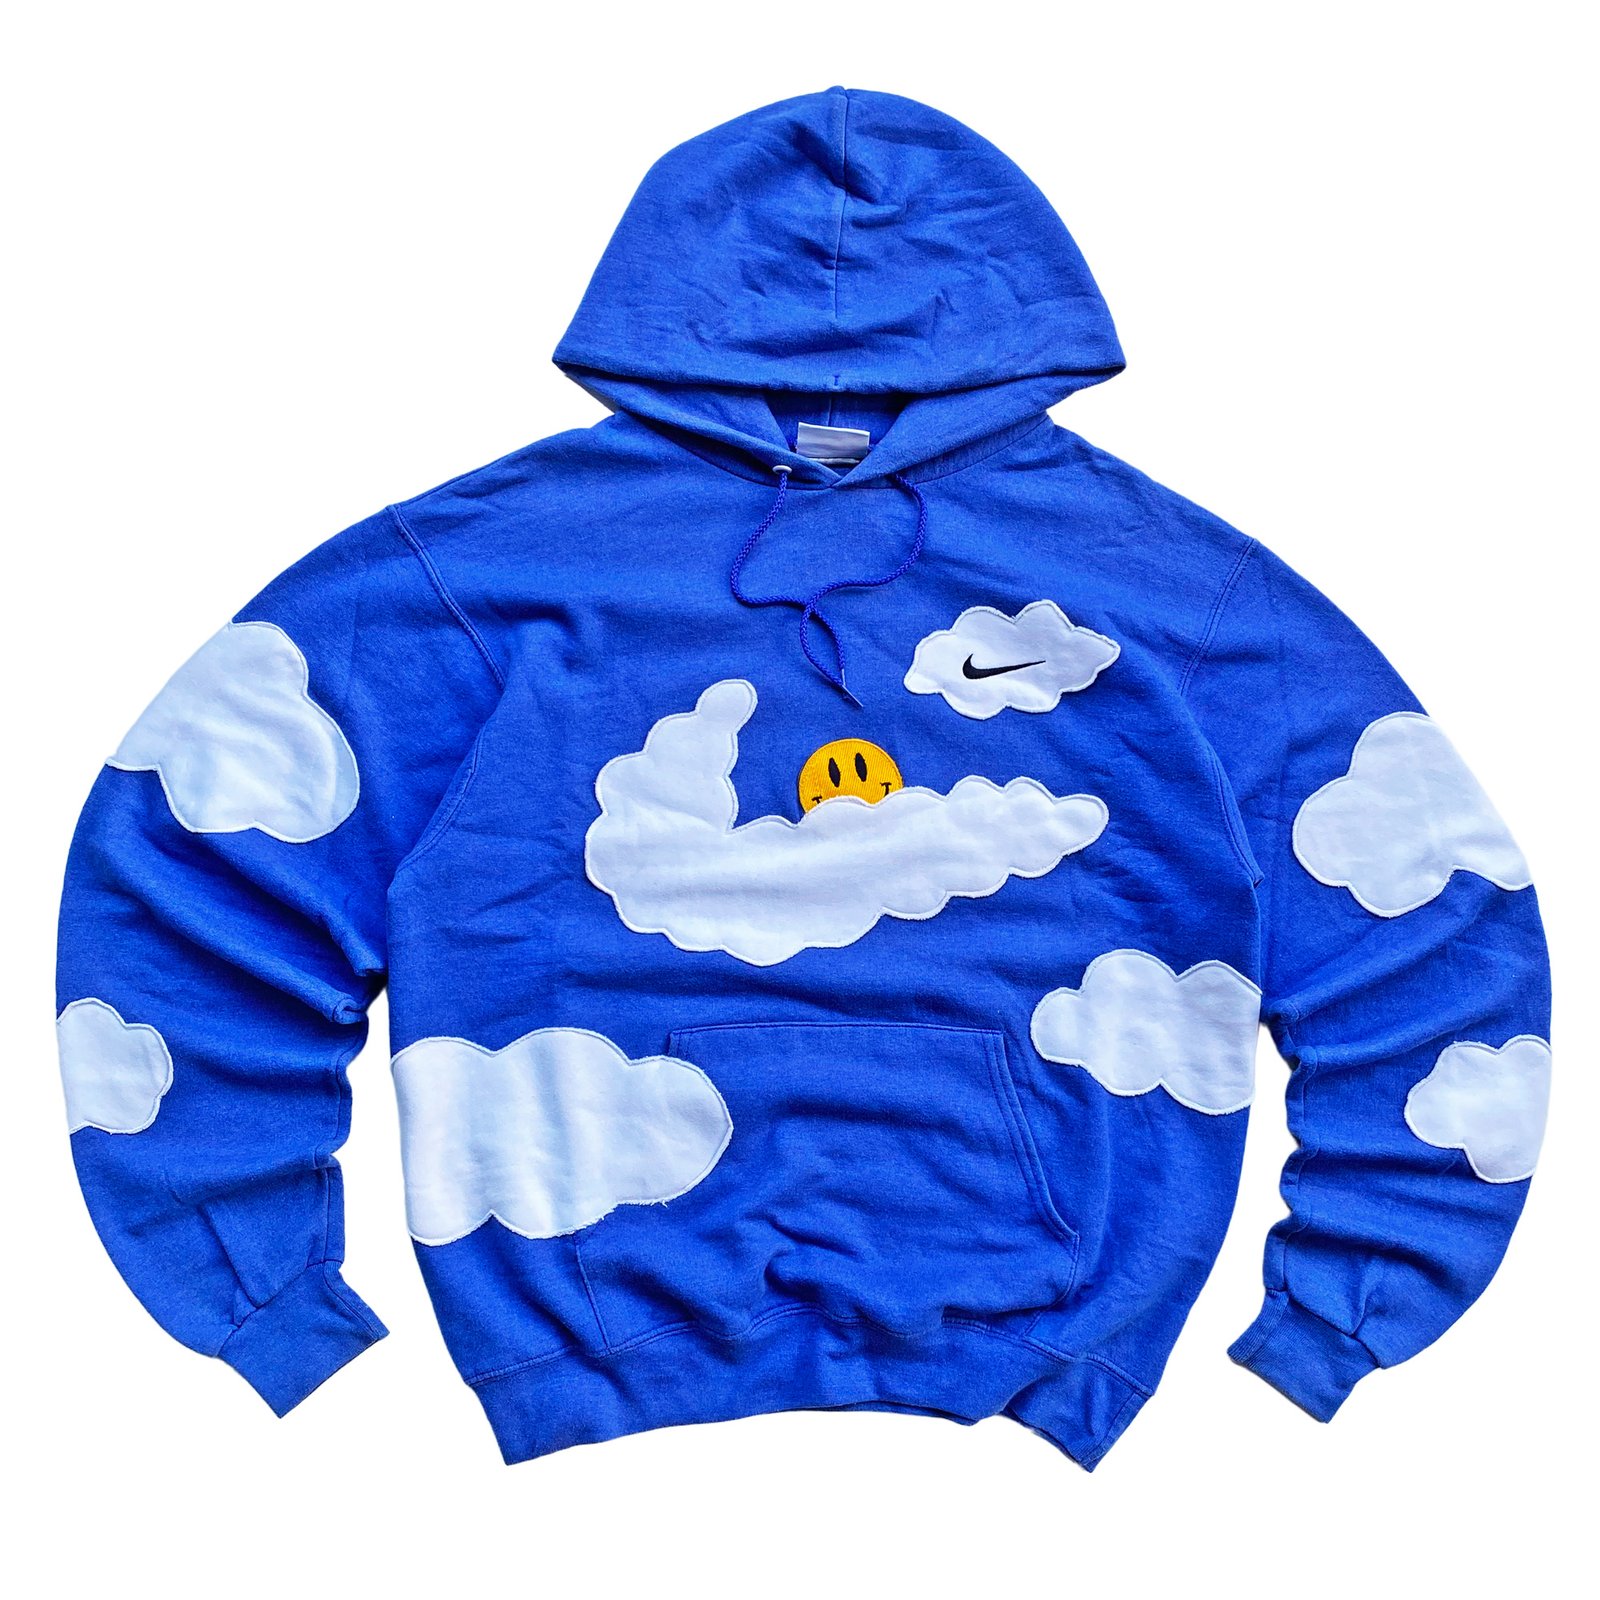 REWORKED NIKE IN THE CLOUD HOODIE SIZE M